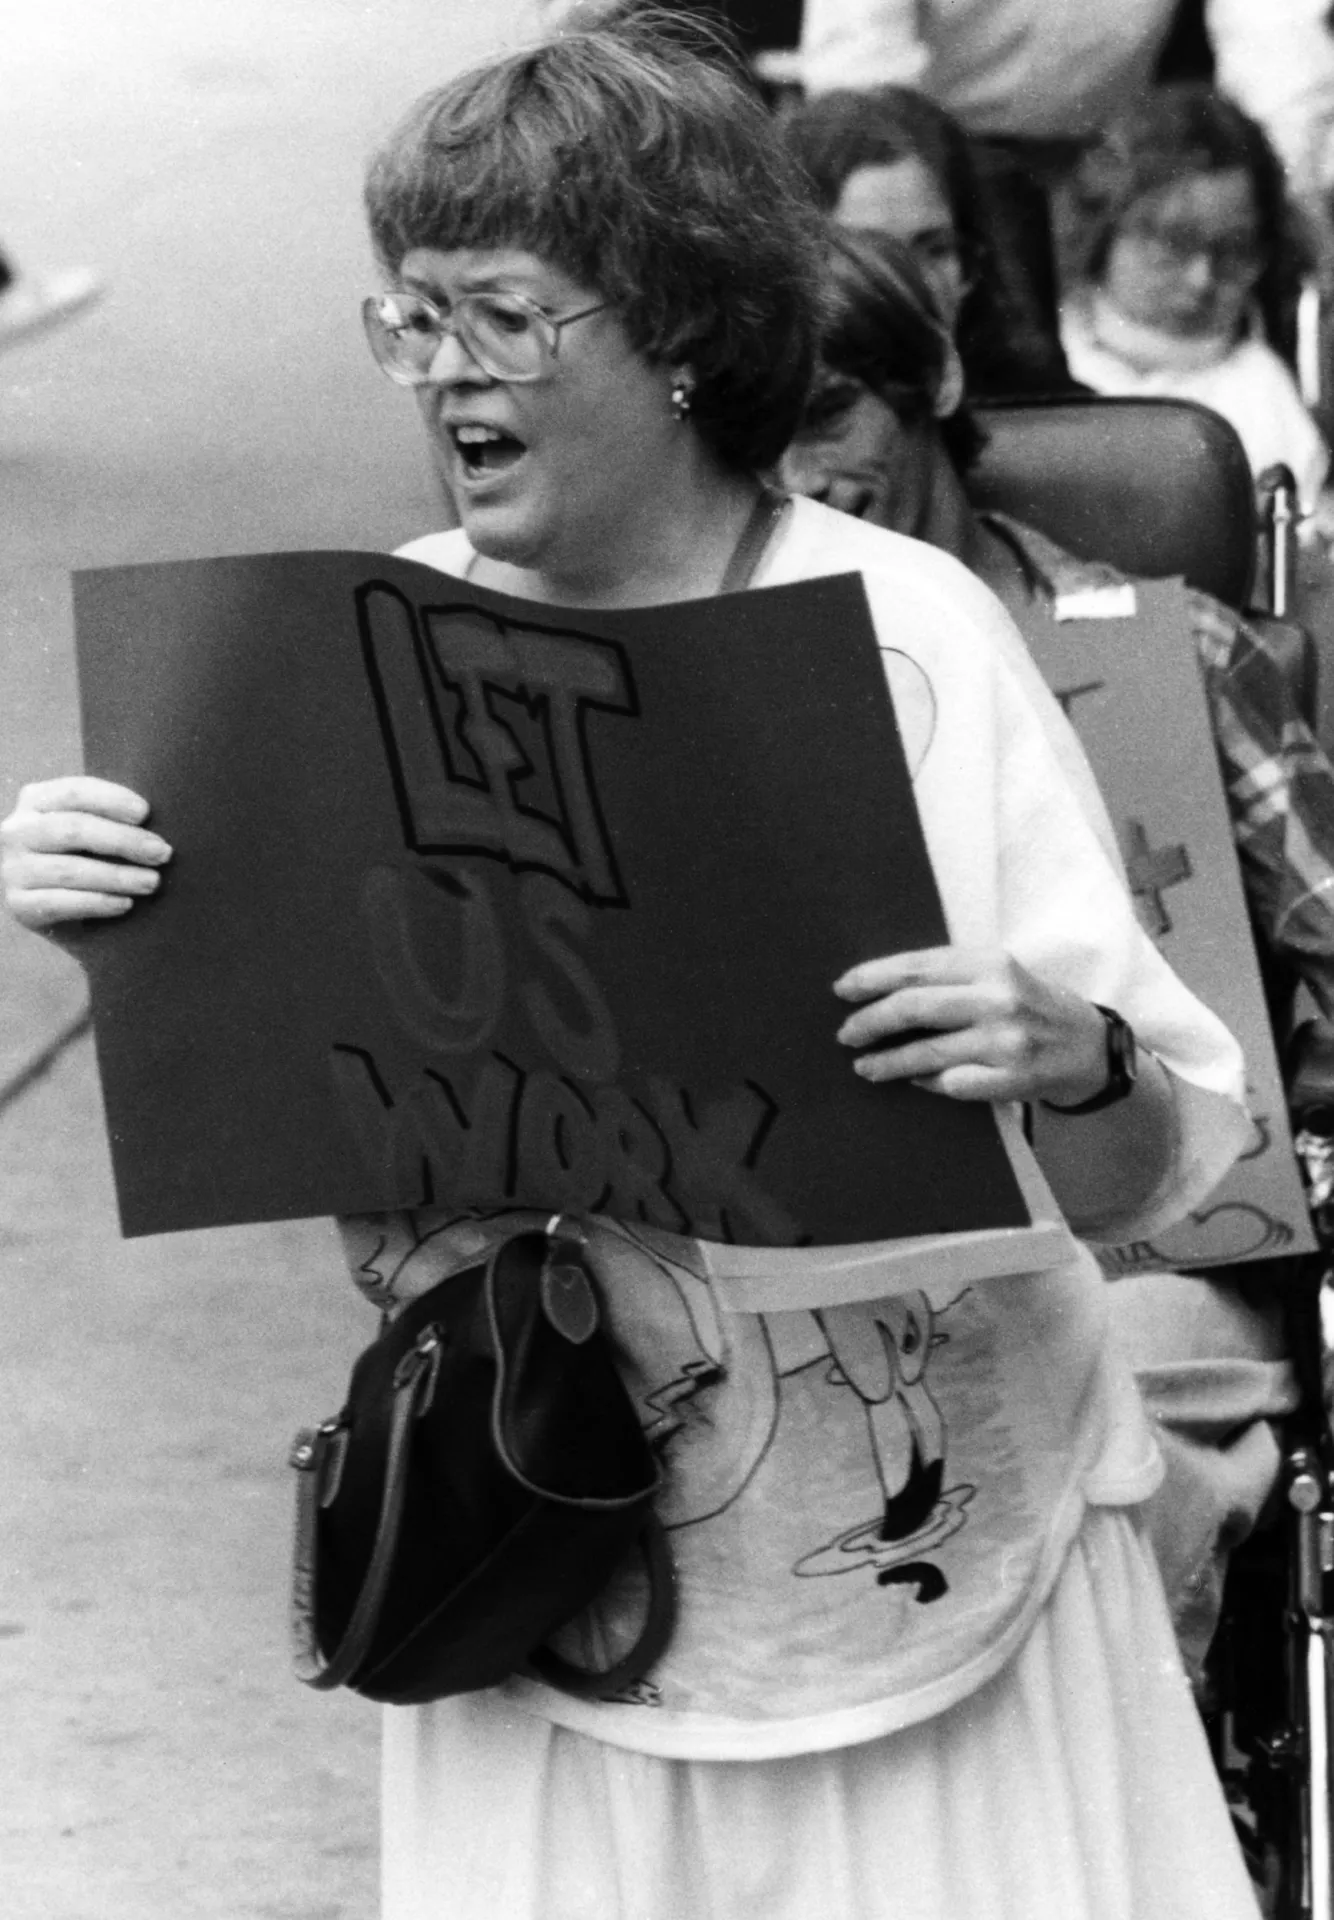 Christina Keeffer with a protest sign that reads “Let Us Work!”.